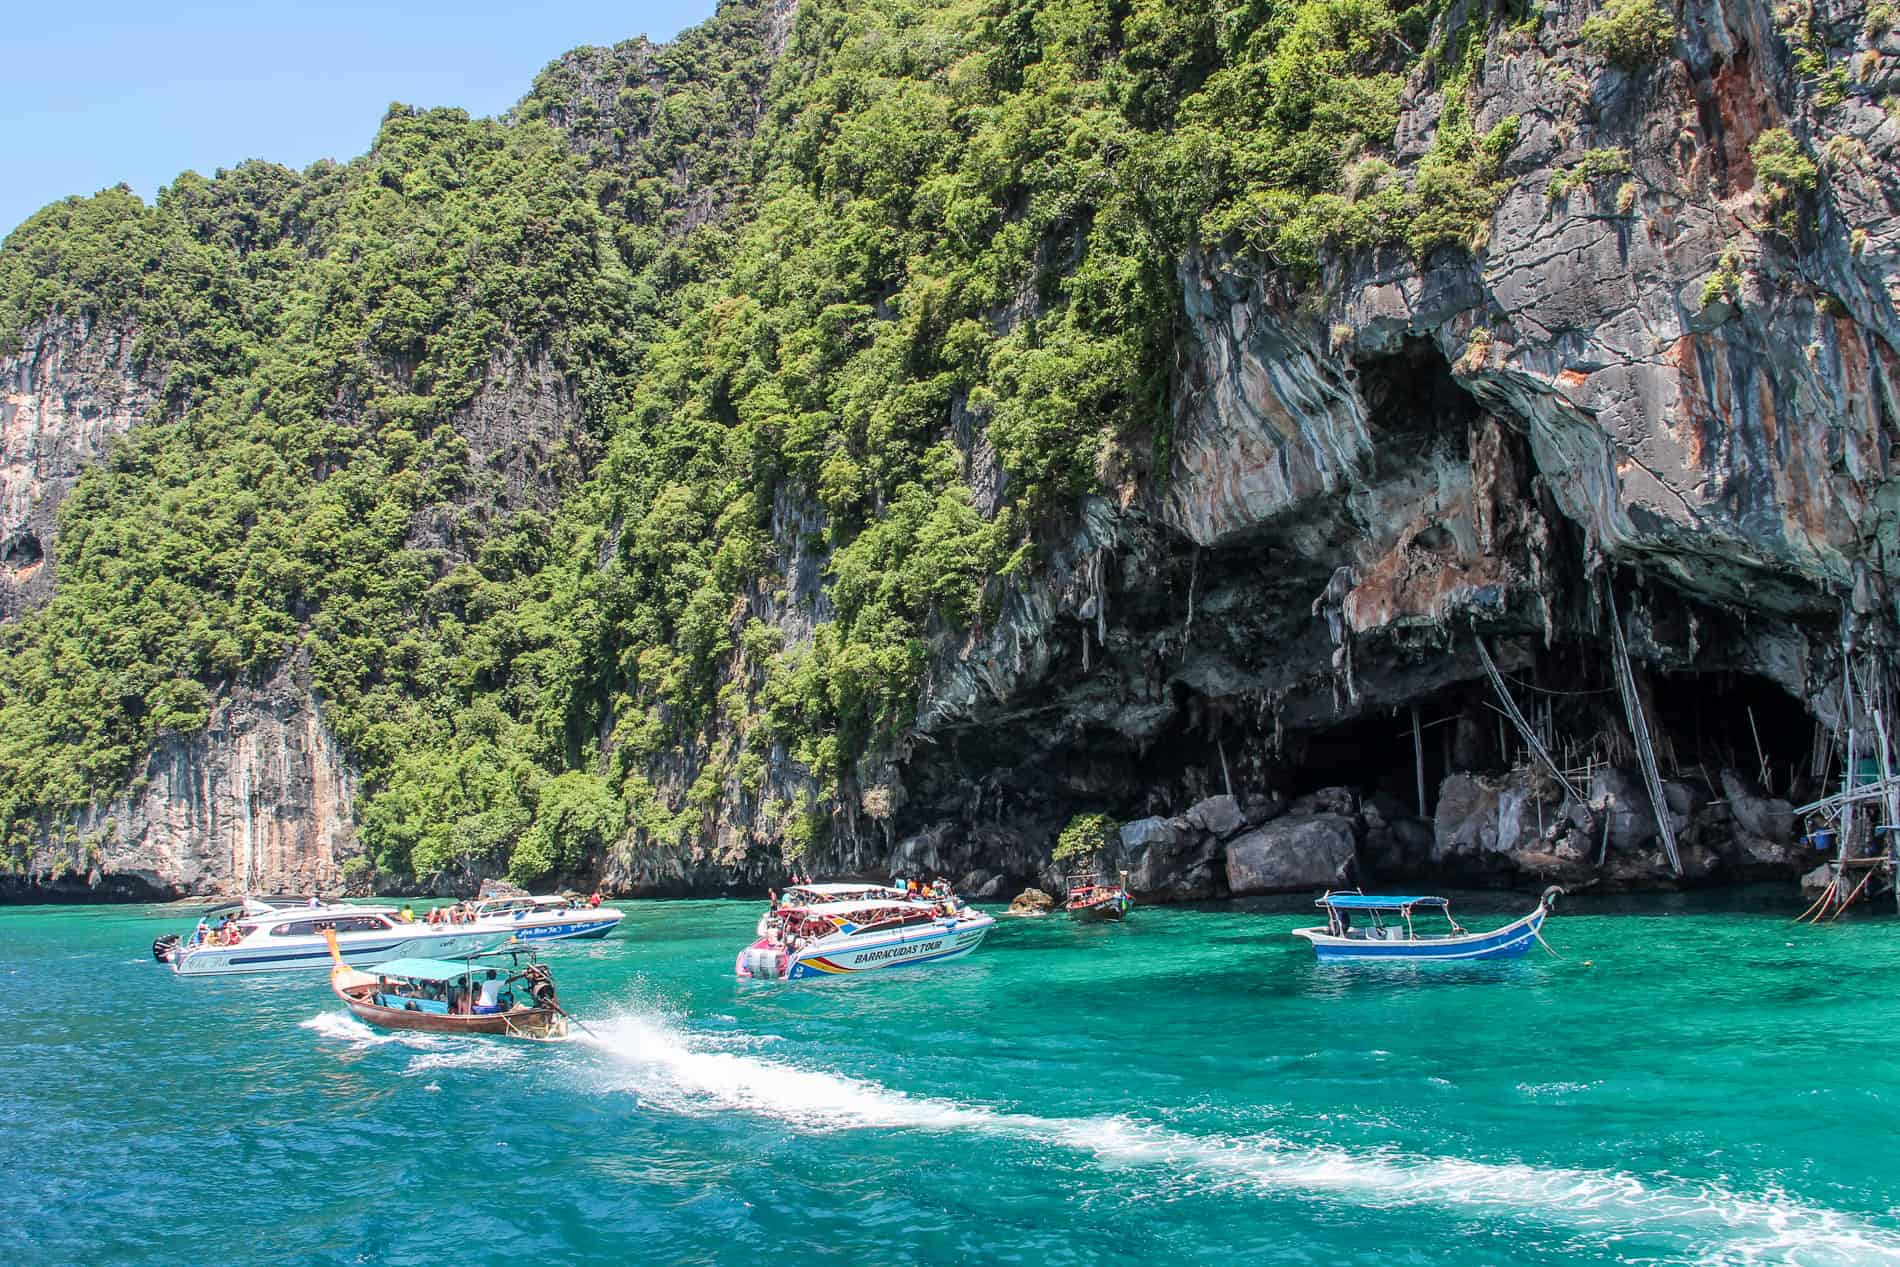 Tourists boats on the emerald waters of Koh Phi Phi Leh Island